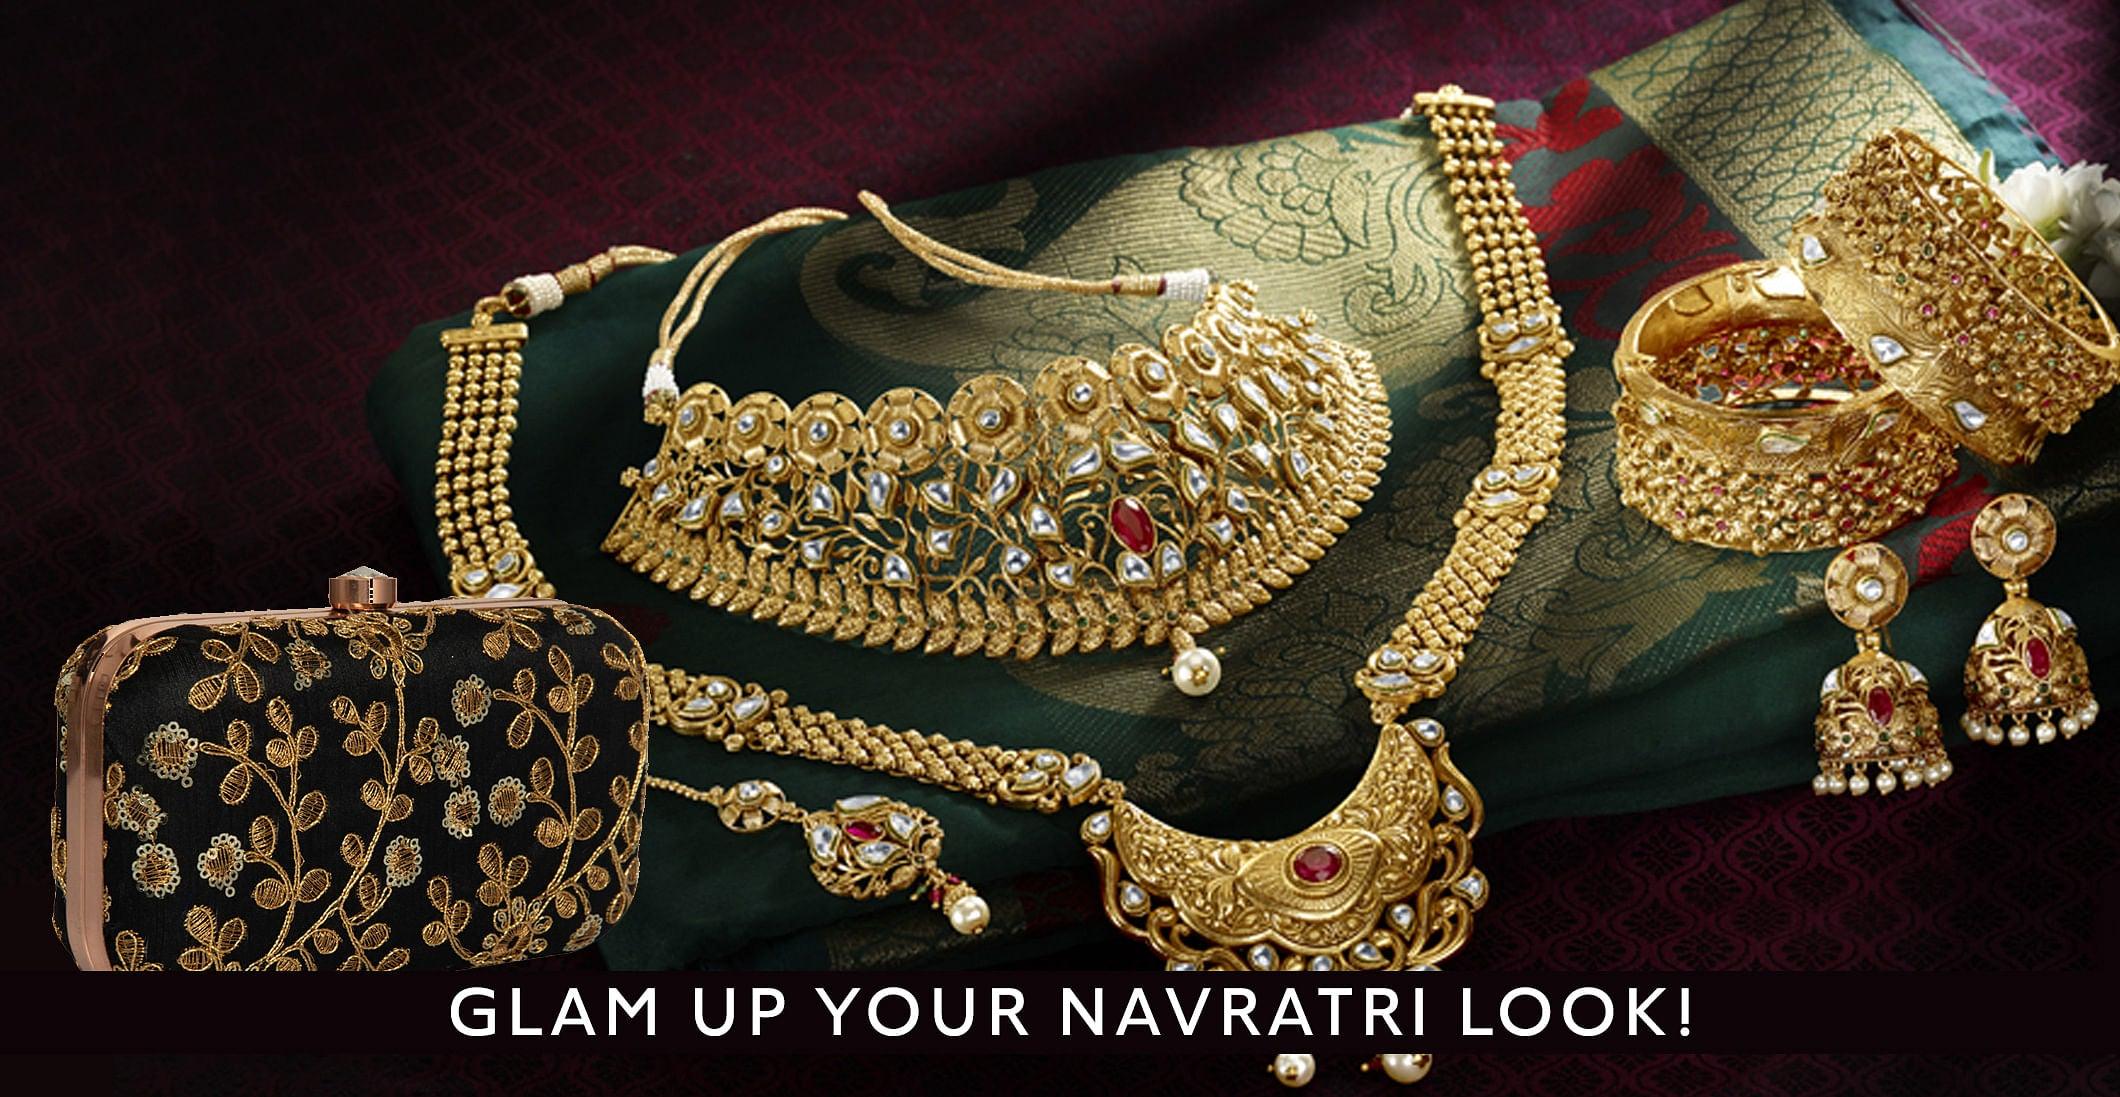 Trending Fashion Accessories To Slay The Navratri Look